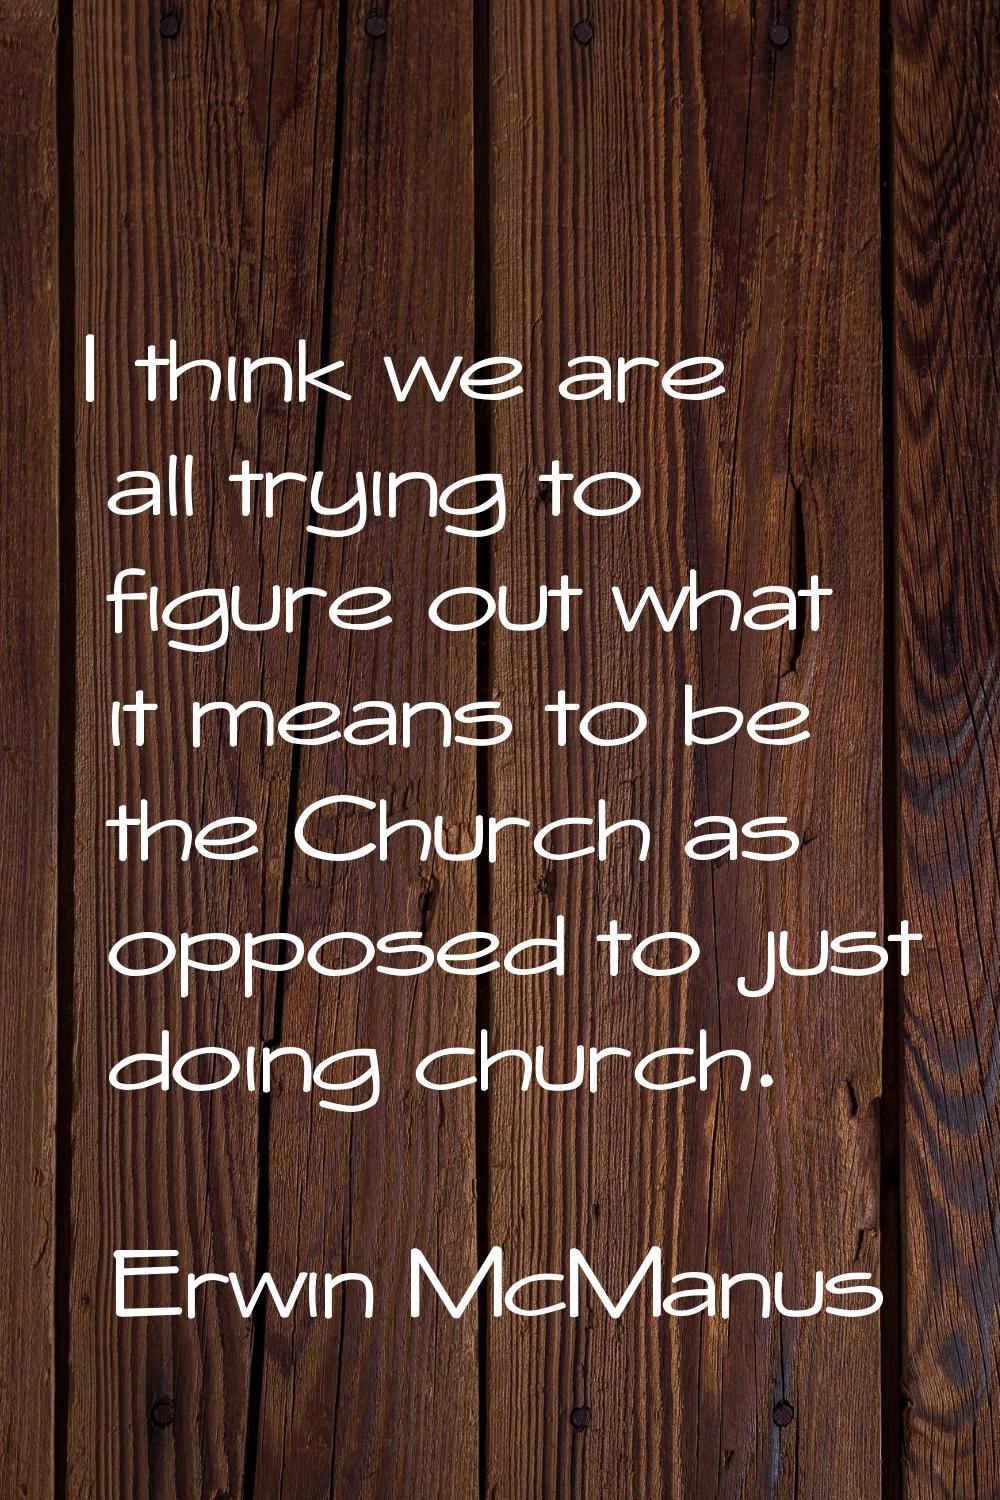 I think we are all trying to figure out what it means to be the Church as opposed to just doing chu